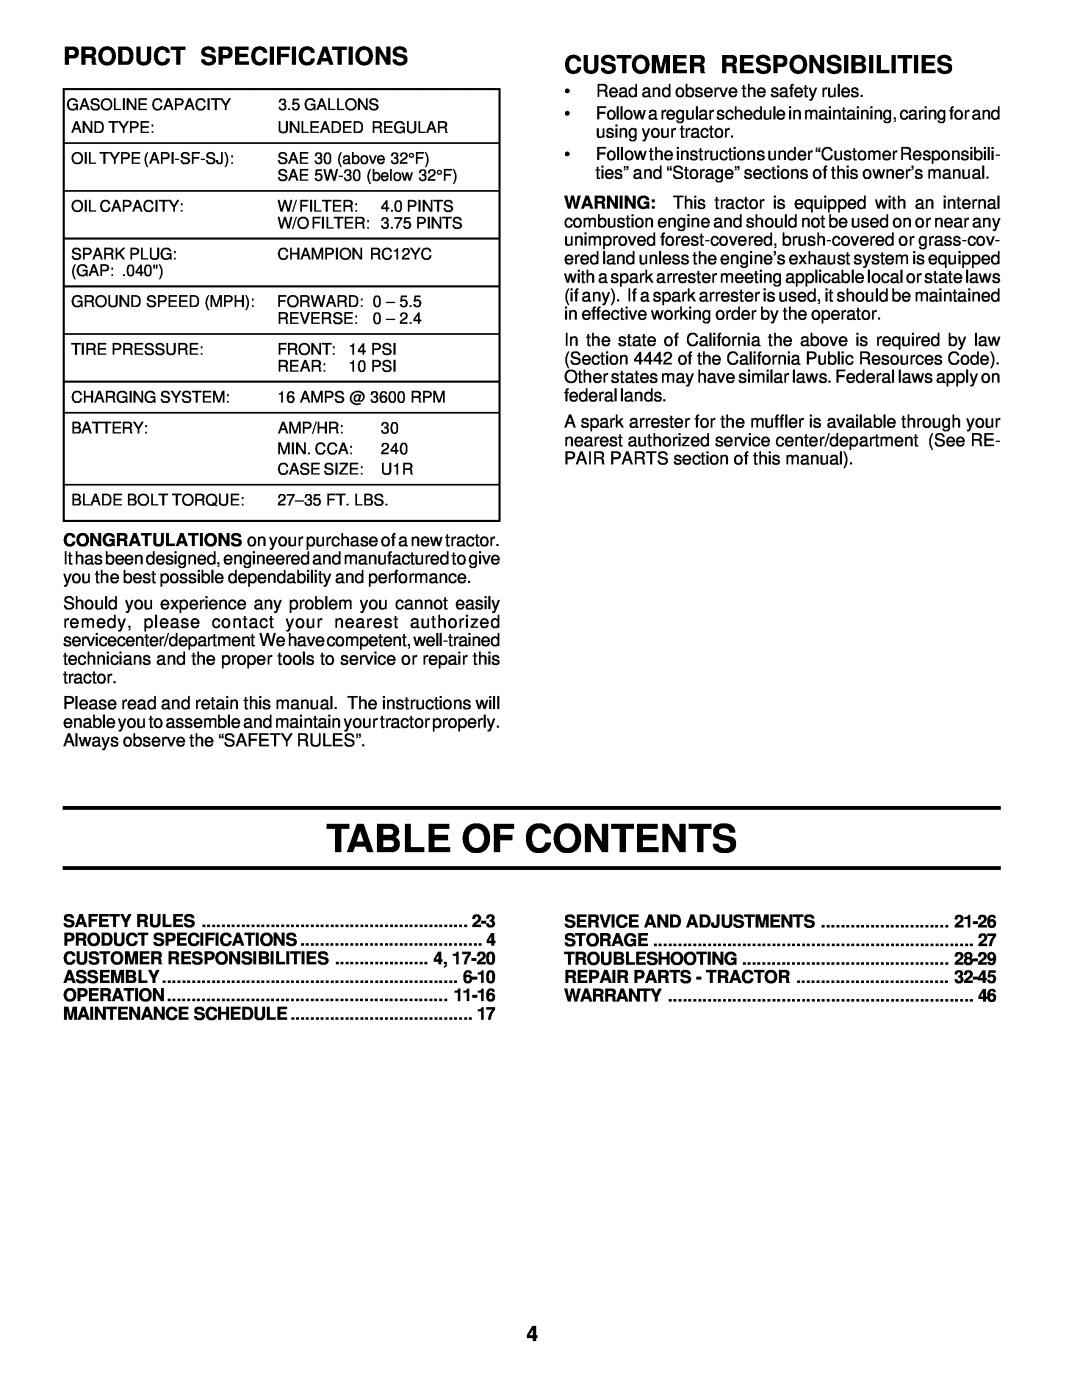 Poulan 178249 owner manual Table Of Contents, Product Specifications, Customer Responsibilities 